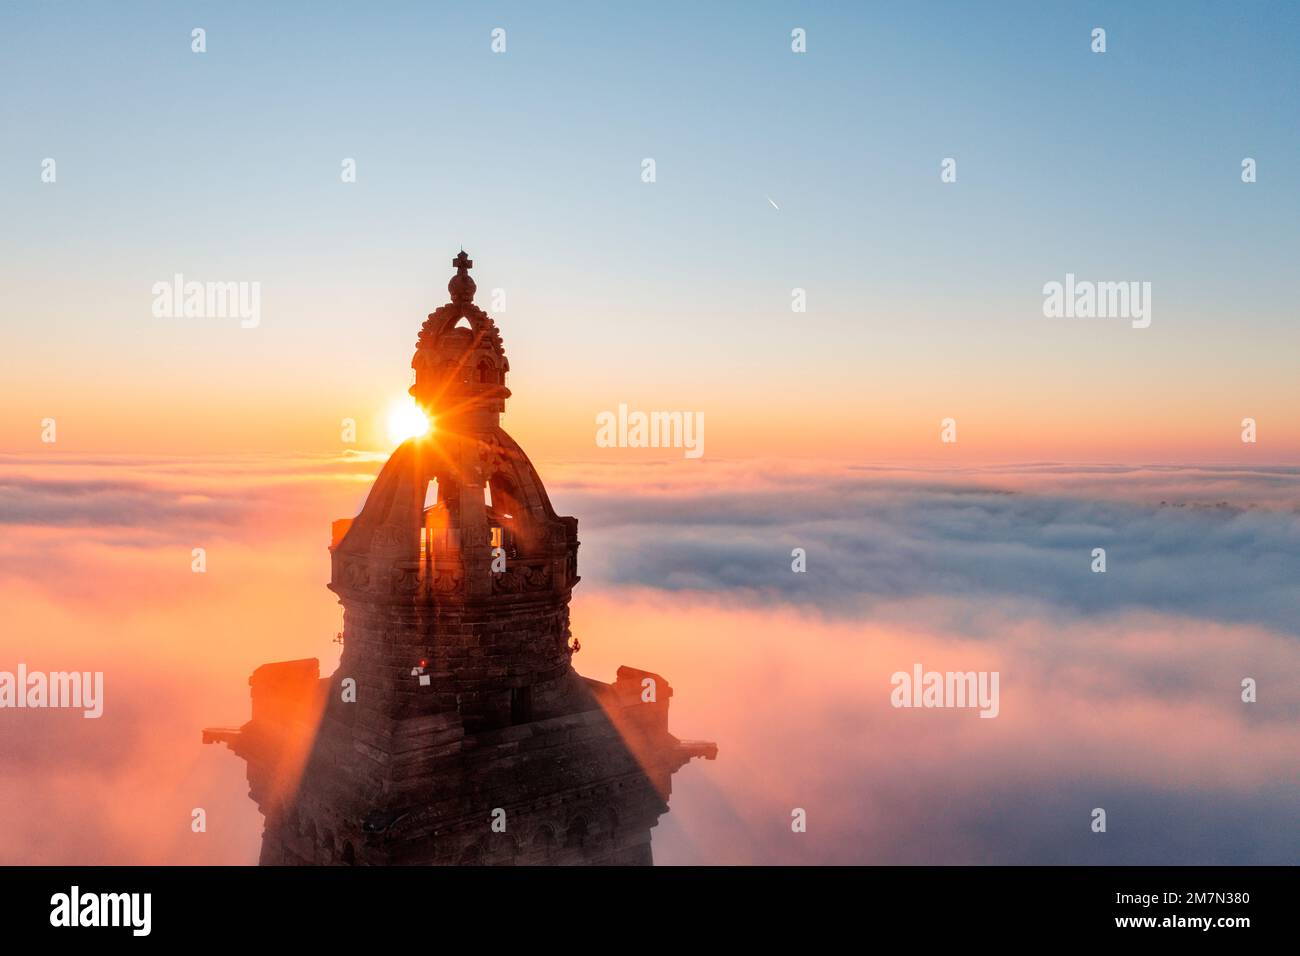 Germany, Thuringia, Bad Frankenhausen, tower of Kyffhäuser monument rises from low clouds, sunrise, backlight, aerial photo Stock Photo